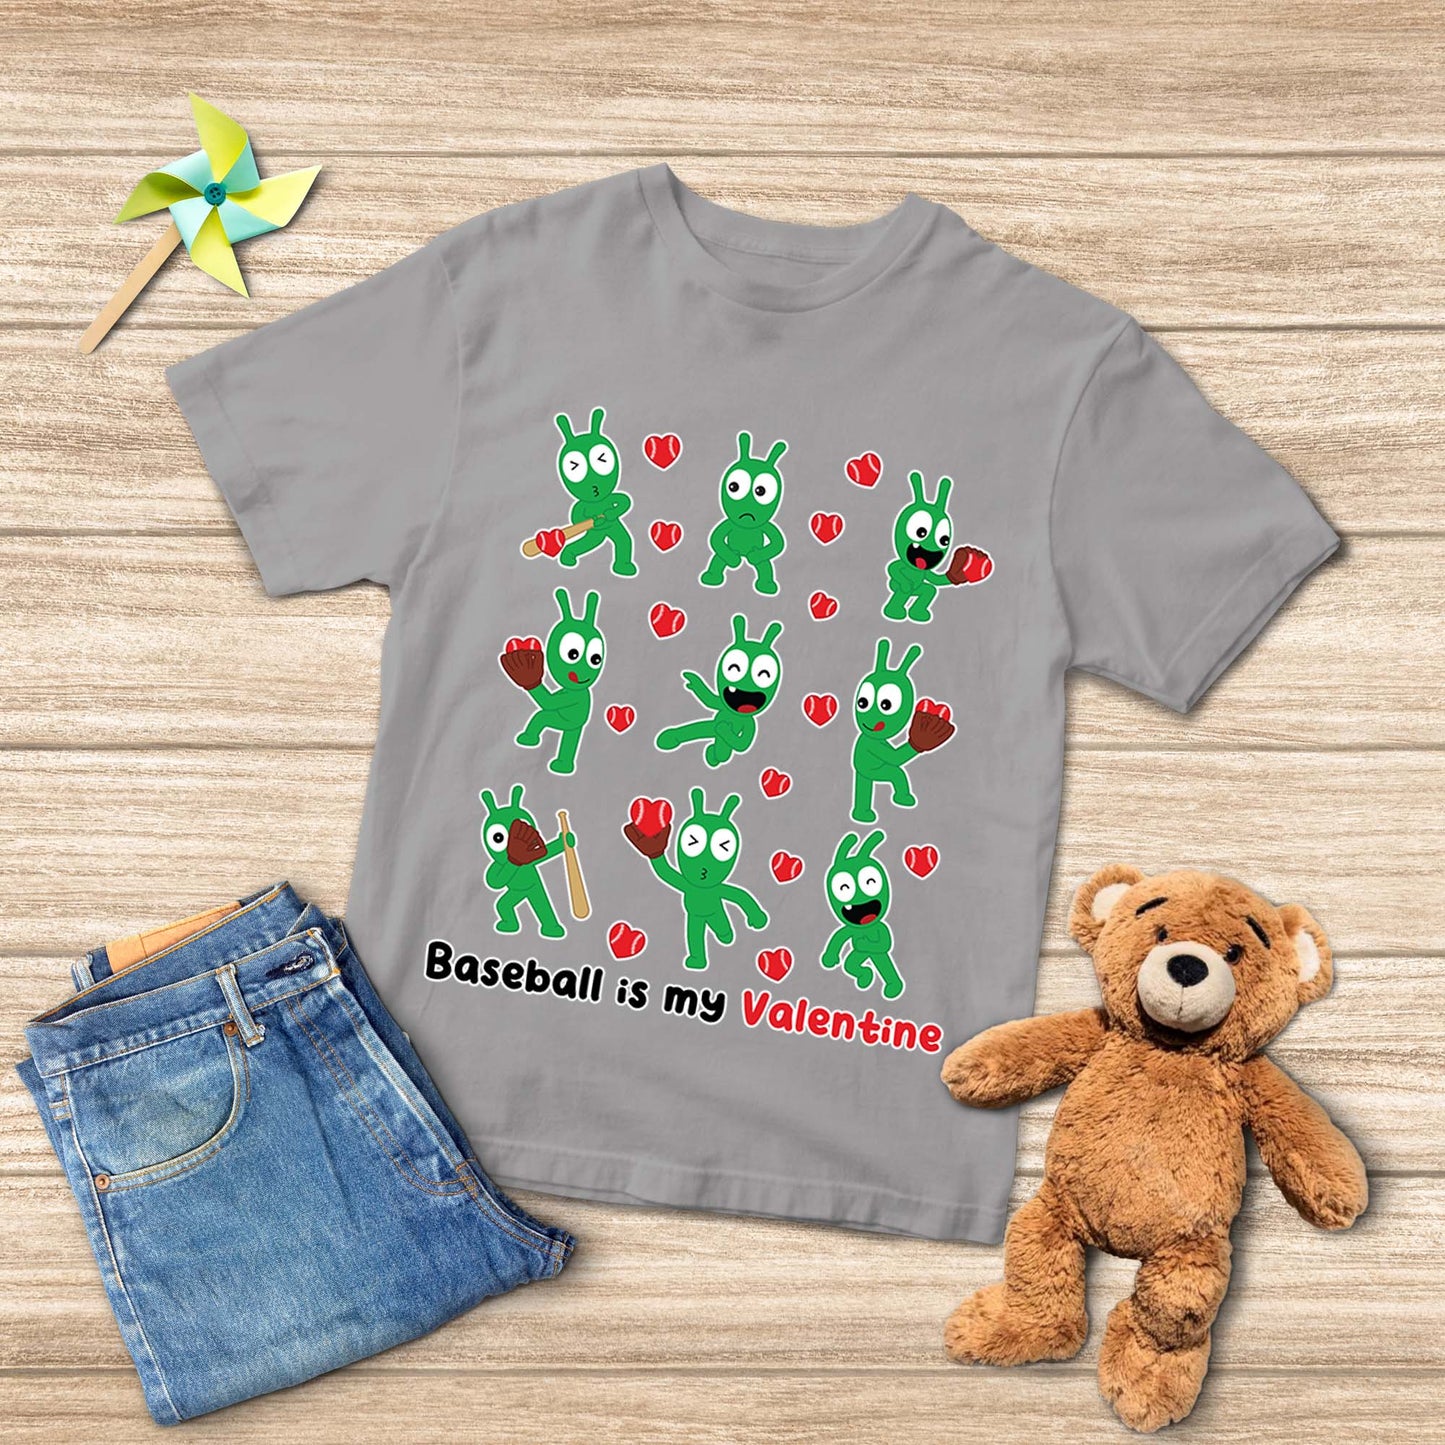 Baseball Is My Valentine Pea Pea Youth T-Shirt, Pea Pea Baseball Shirts Gift For Sport Lovers